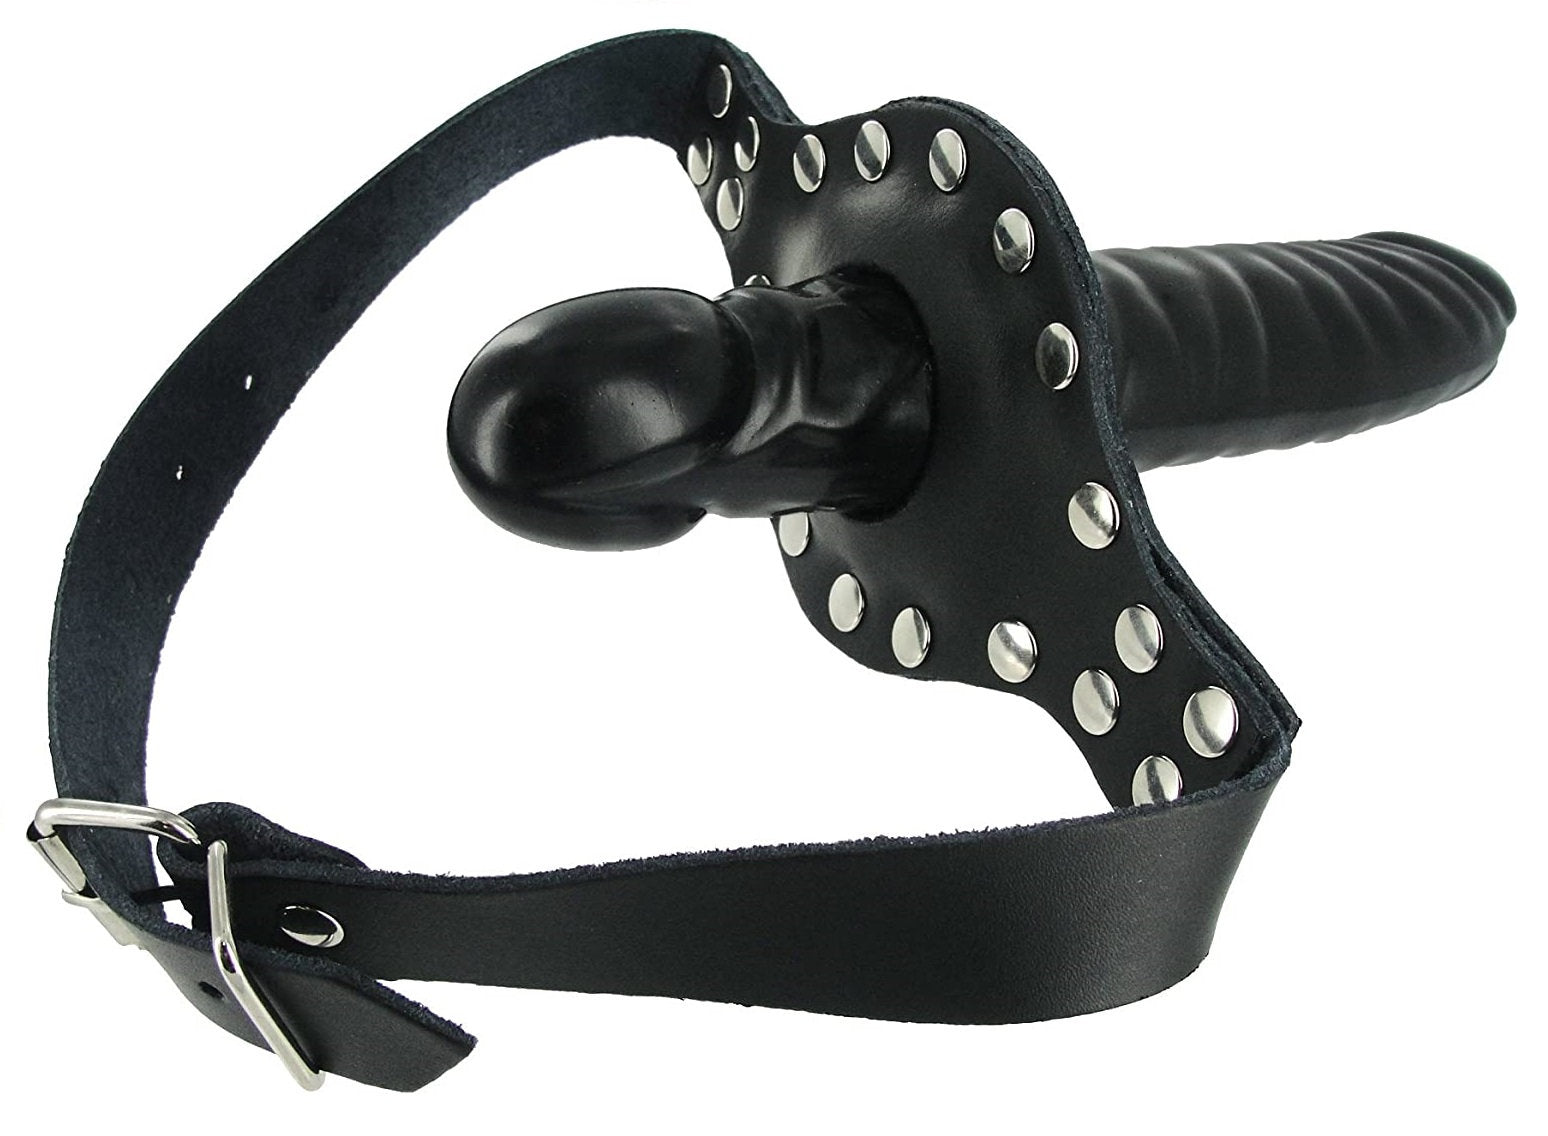 Mouth Gag Dildo with Harness Belt Adjustable Leather Sex Toy for Men W picture